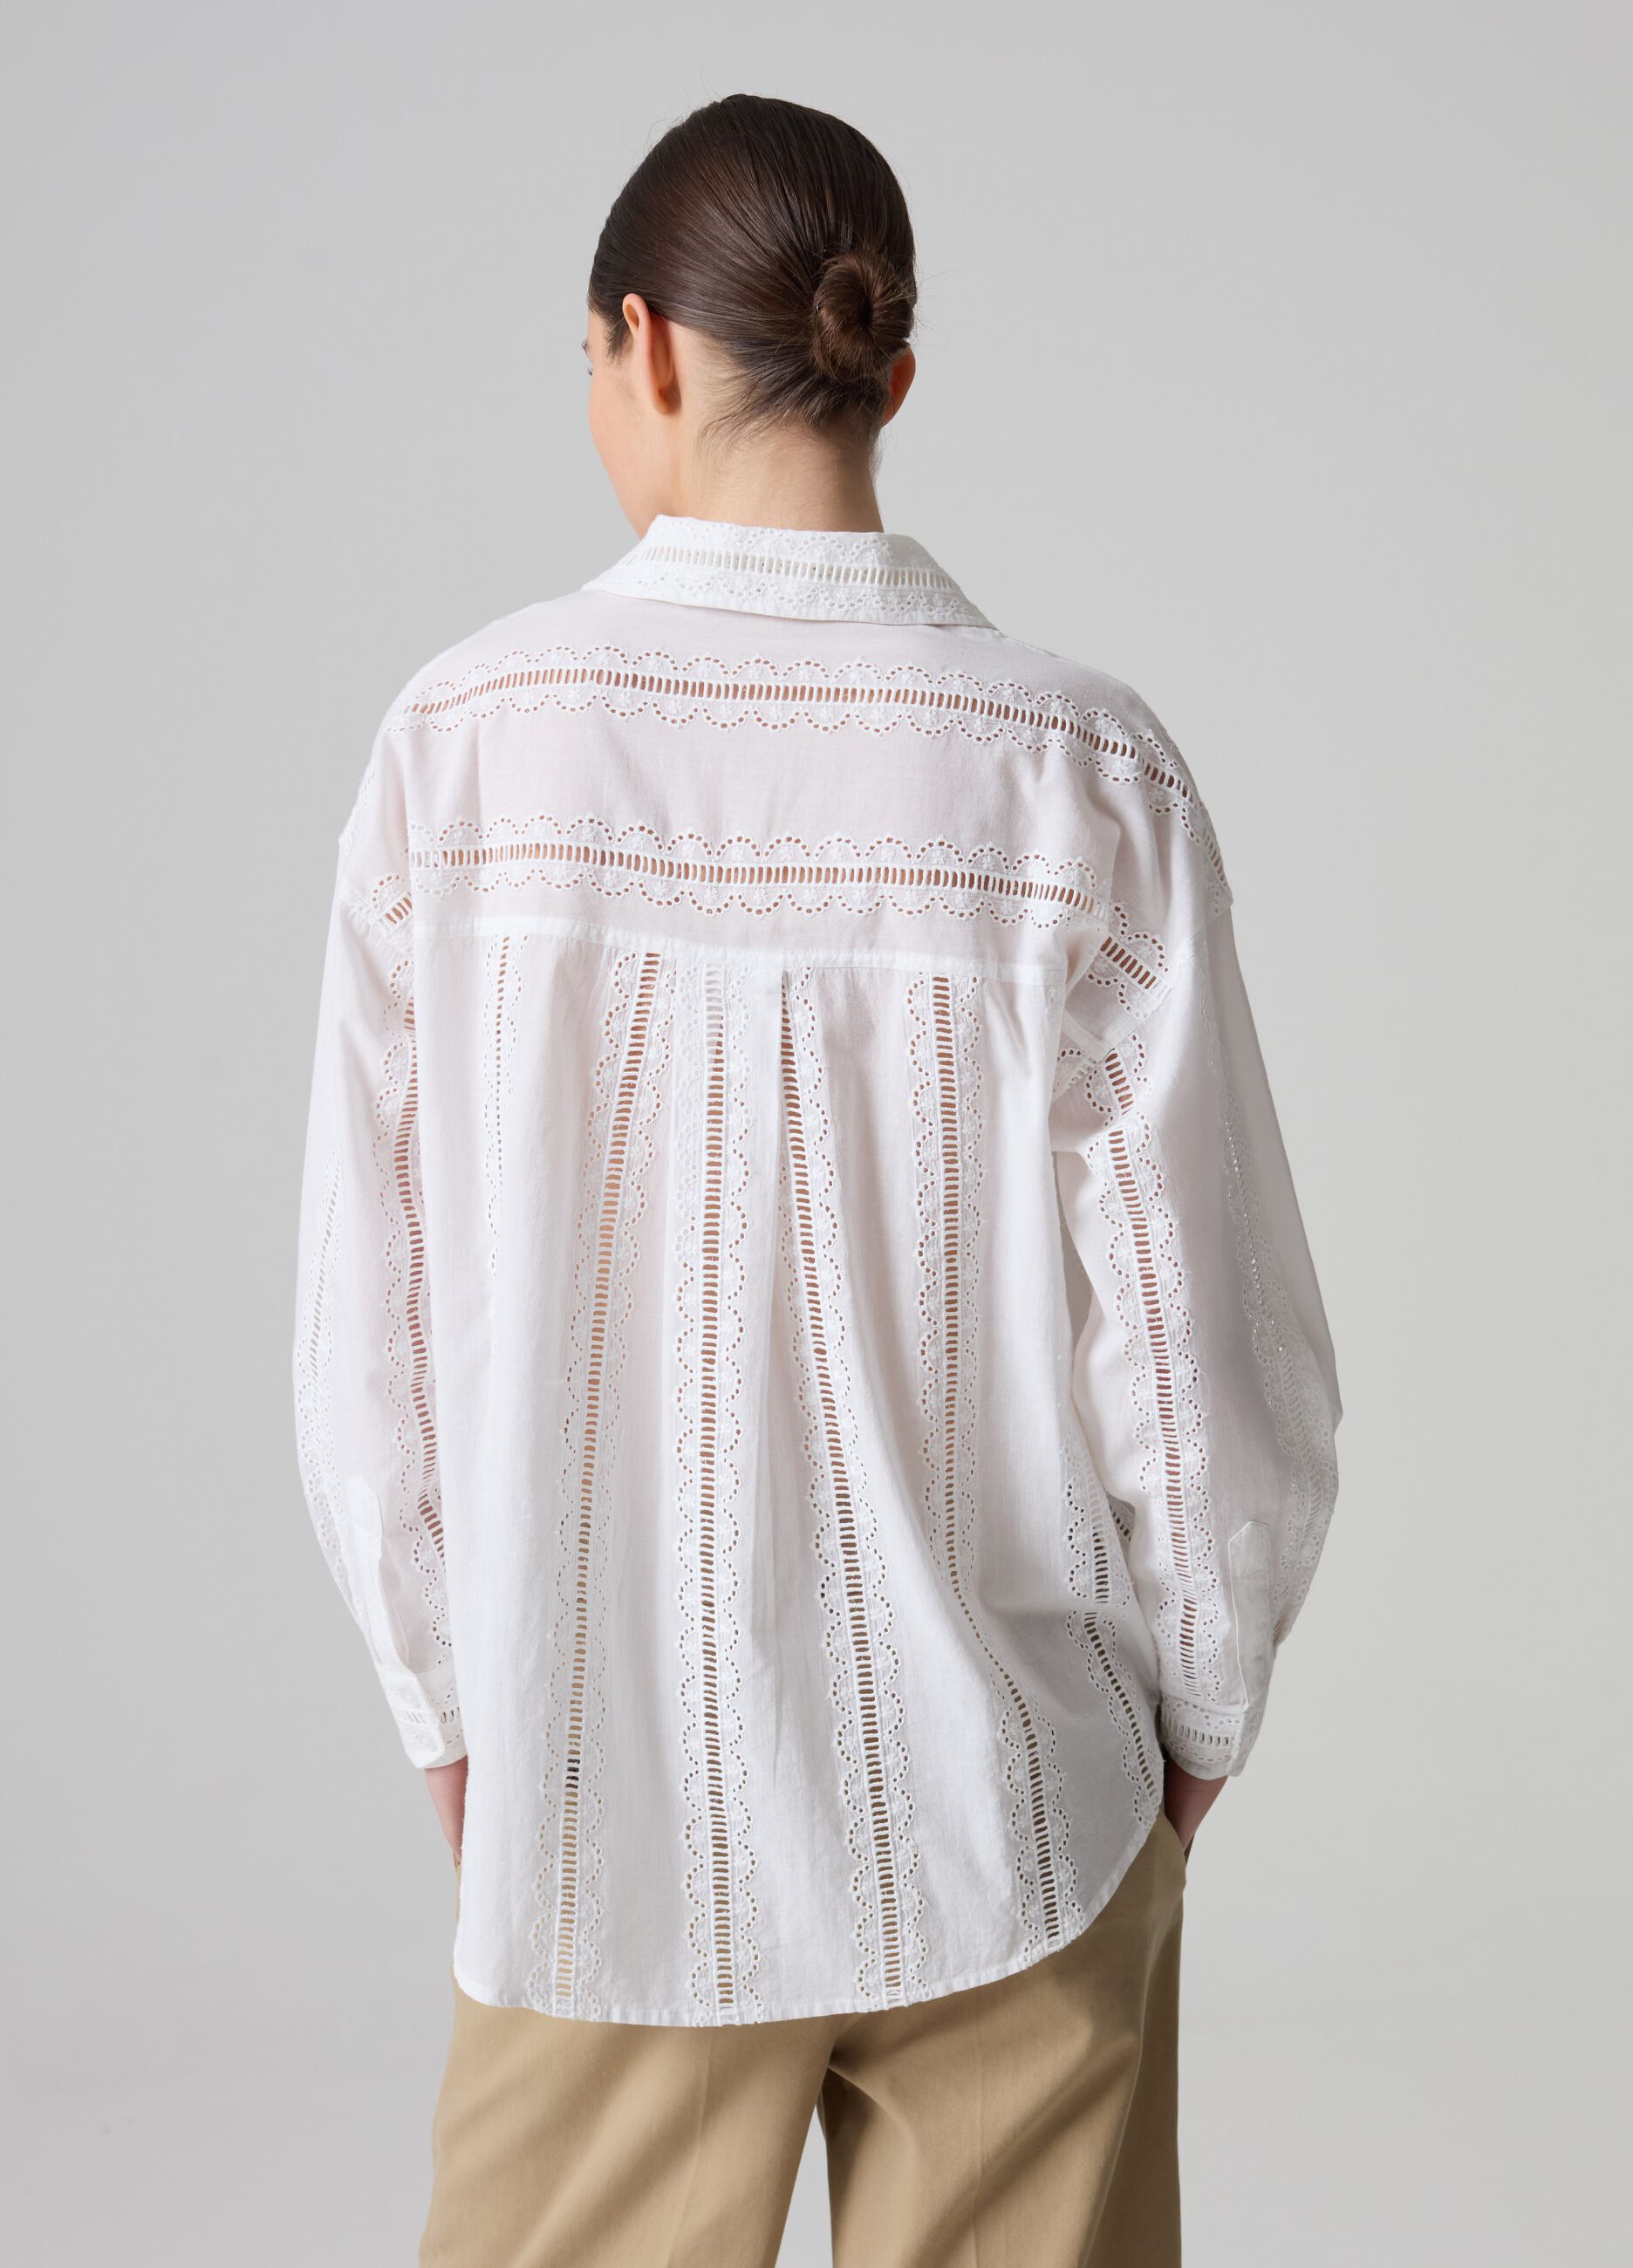 Oversized shirt with openwork details and broderie anglaise